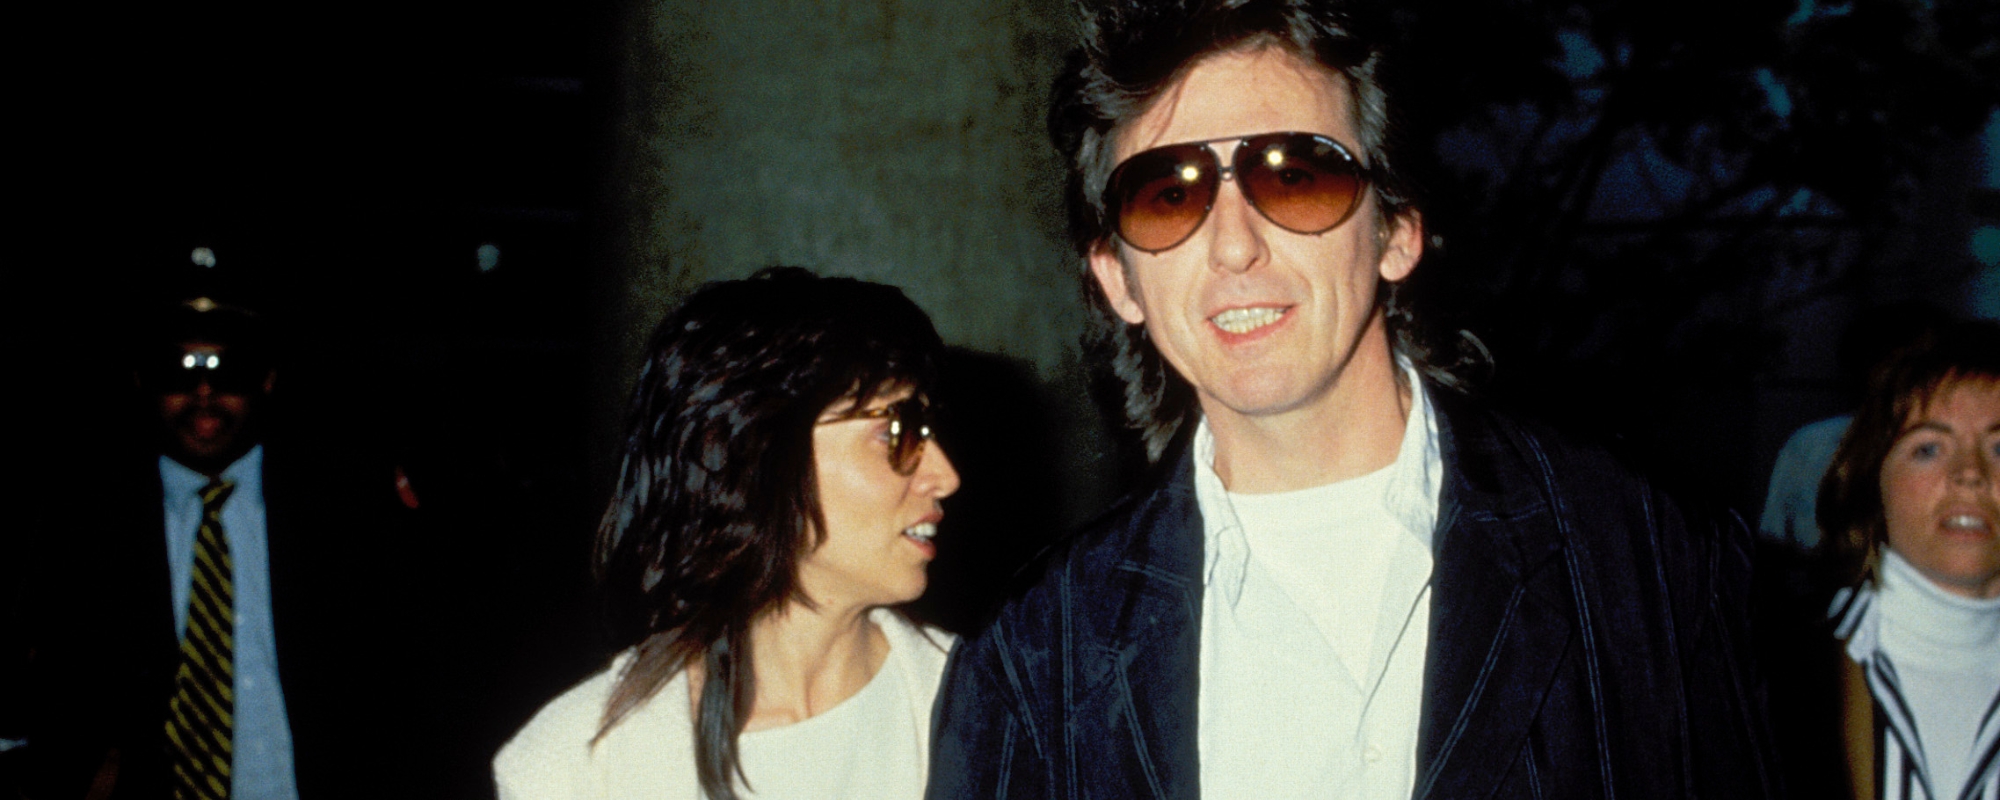 George Harrison’s Widow Says She Got a “Magical” Sign That Her Late Husband Approves of New Beatles Song